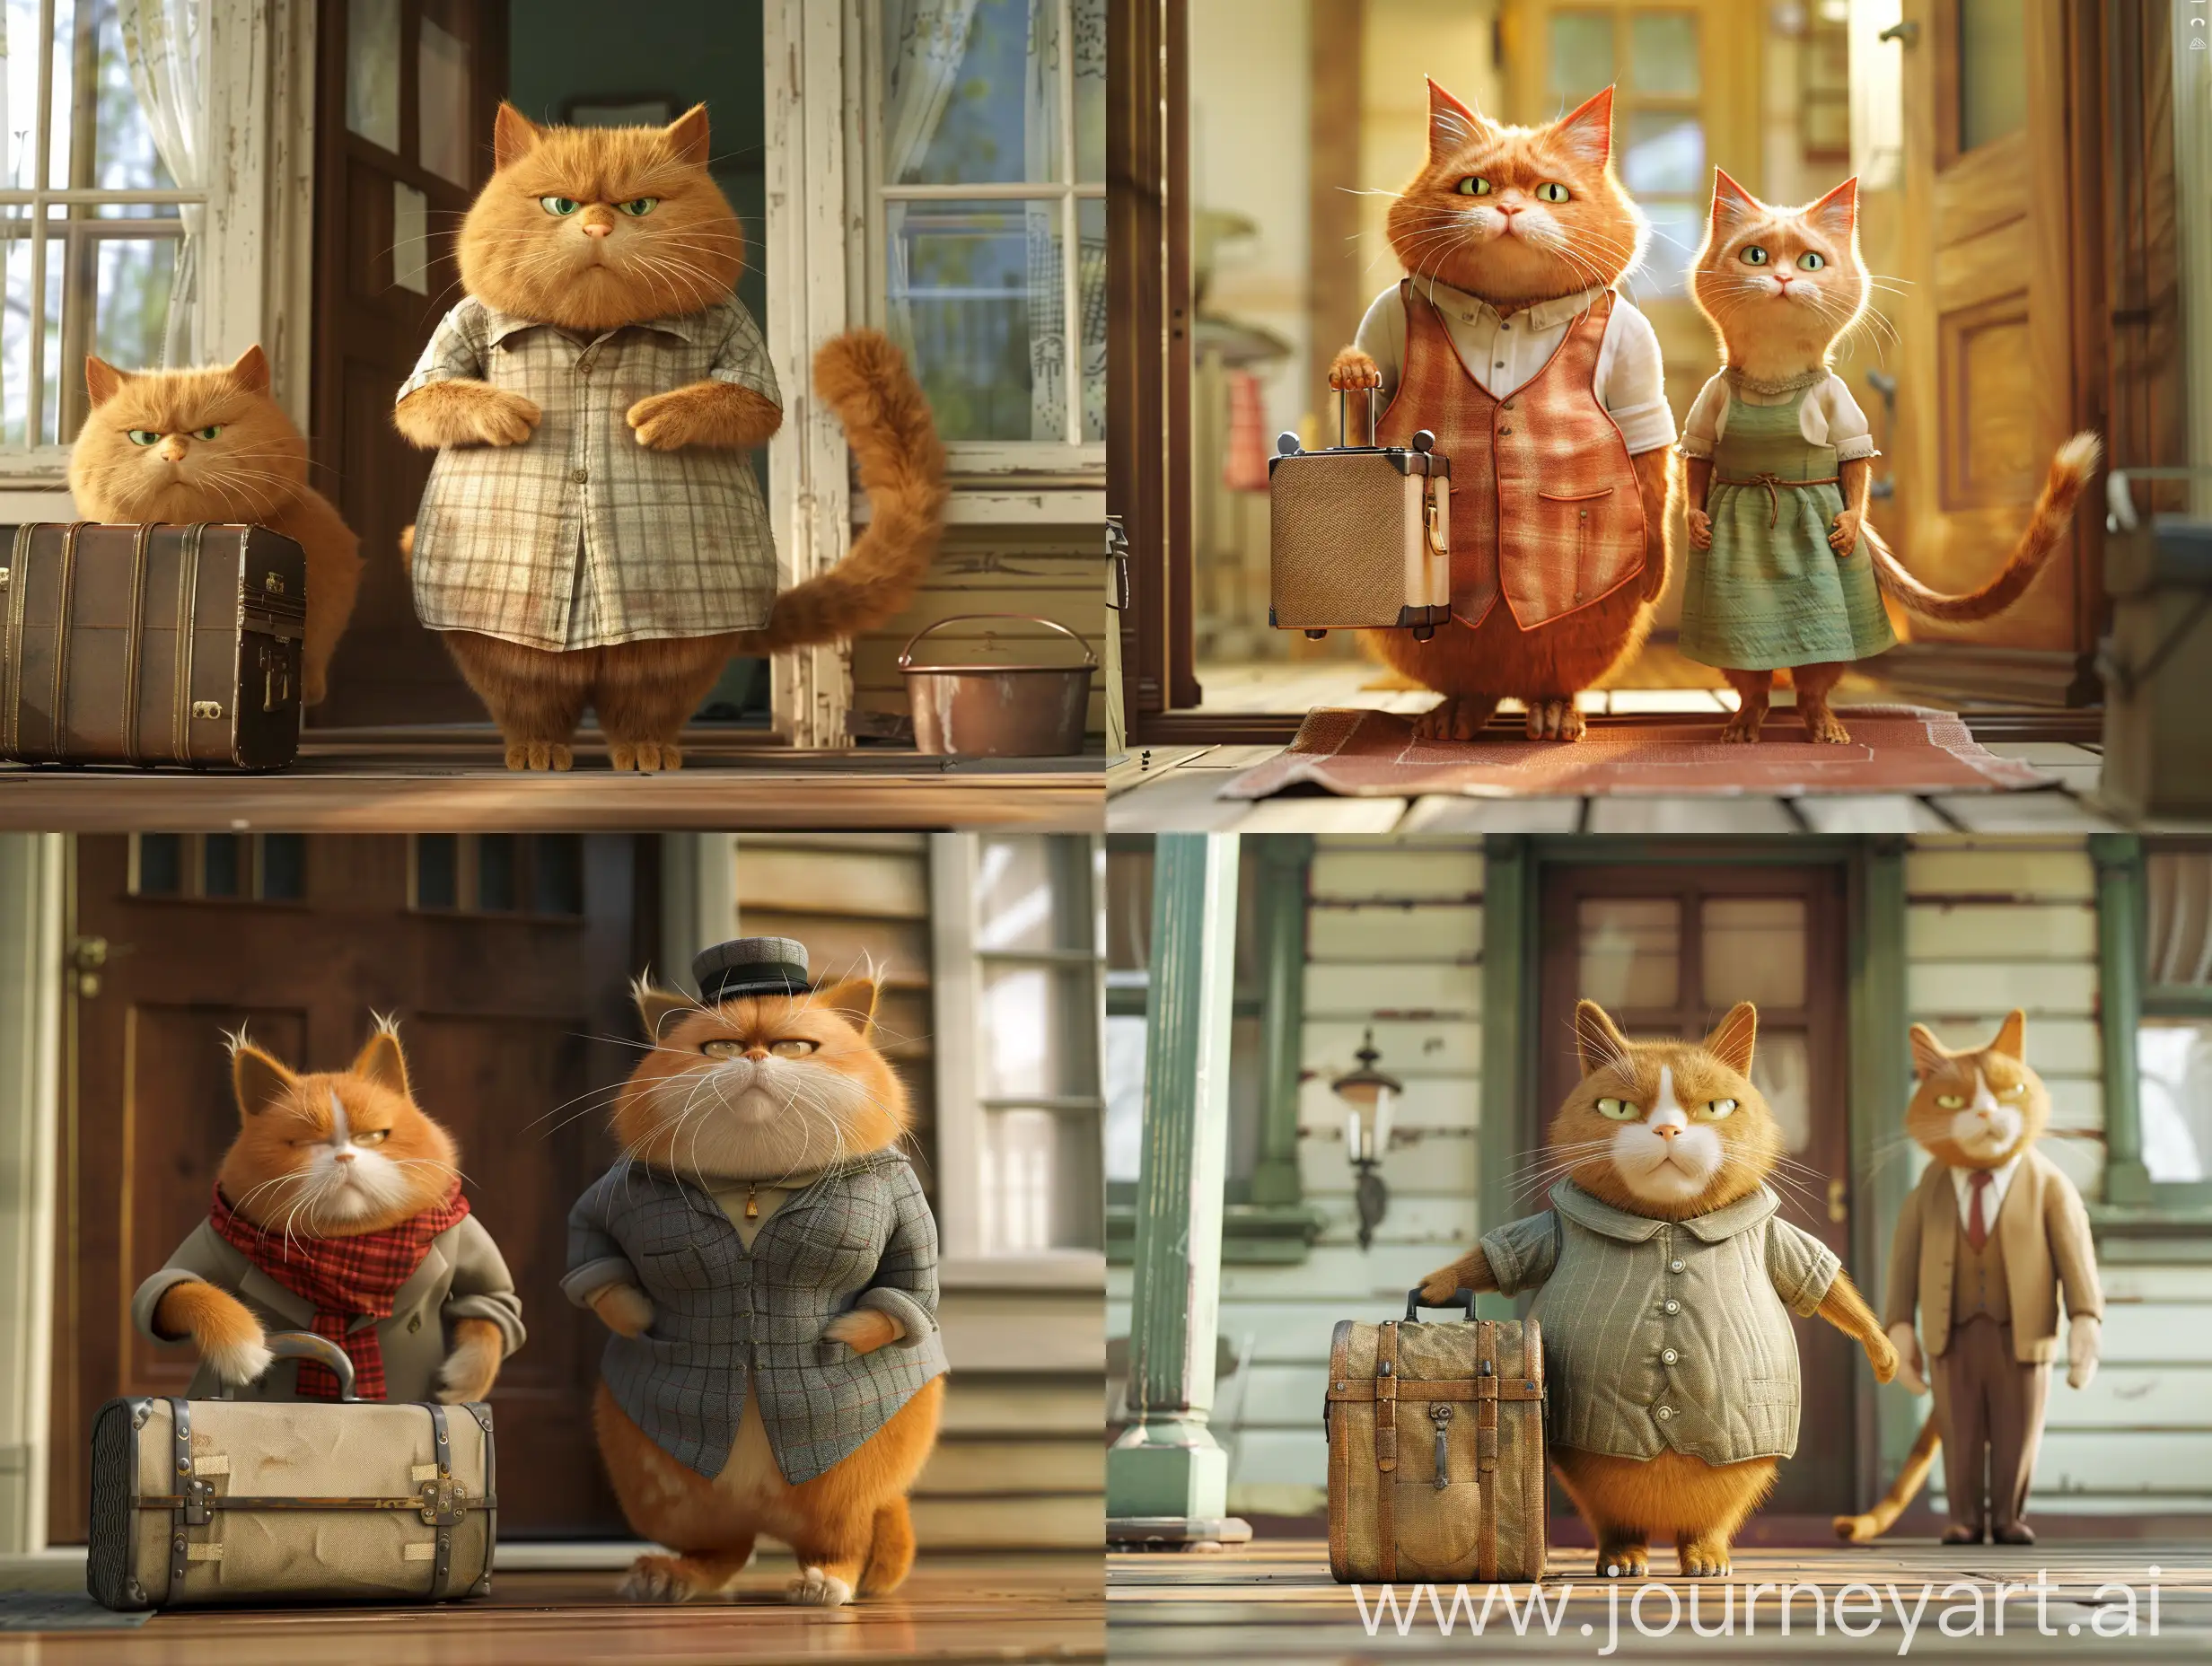 ginger cat mother (Anthropomorphic Cat, Wearing human clothes and imitating human movements) , A grown-up chubby ginger cat holding a suitcase. The cat mother and cat father, both with human-like characteristics, are sad but proud, standing at the front door of their home.shallow depth of field, low angle artistic shot, Jean-Baptiste Monge, Mary Blair, Craig Davison. Chibi kawaii. Sweet dainty face, whiskers, softest fur, cinematic, realistic, detailed, hyper quality, FHD, 8K, C4D. Show different angles of the scene. In the style of Kurosawa Akira.